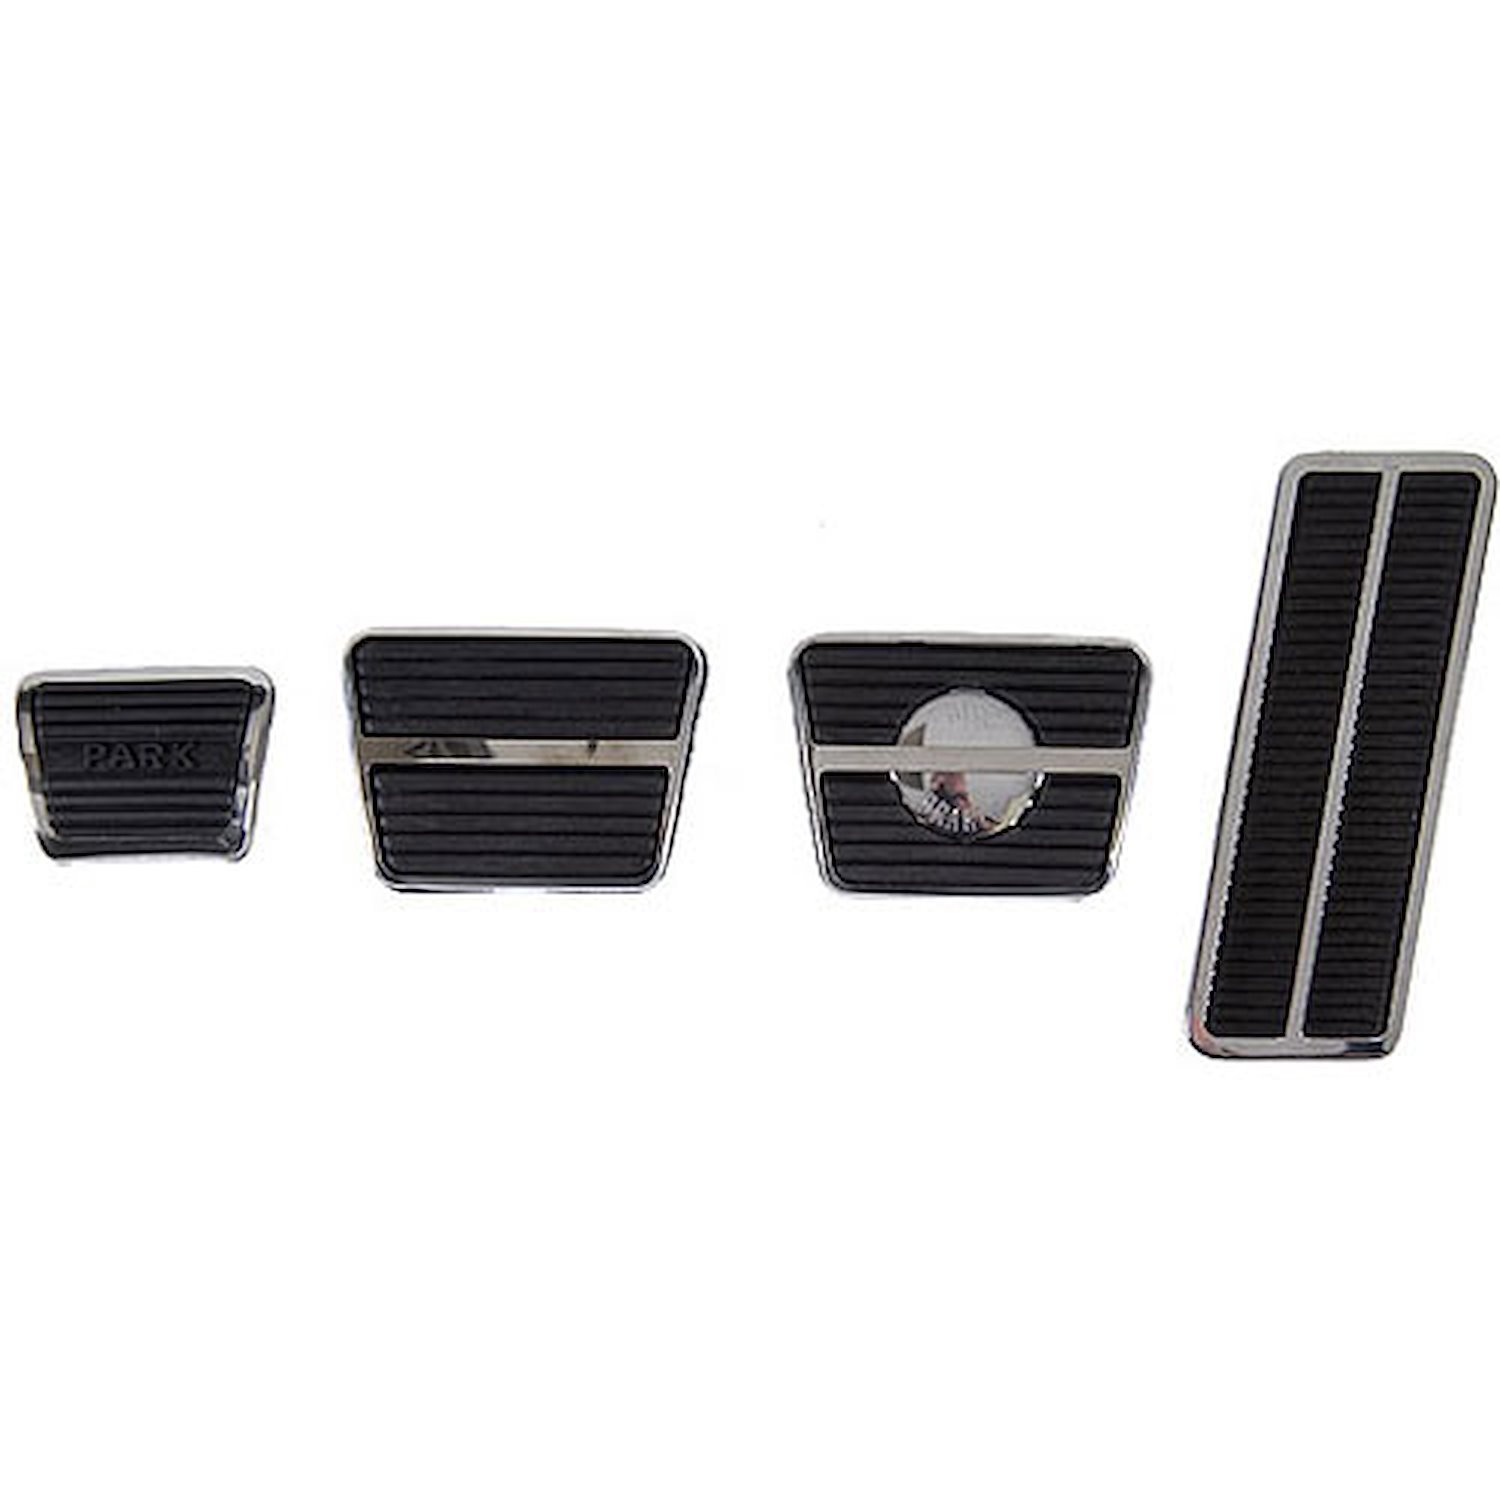 Pedal Pad Kits for Camaro, Chevelle, Chevy II,